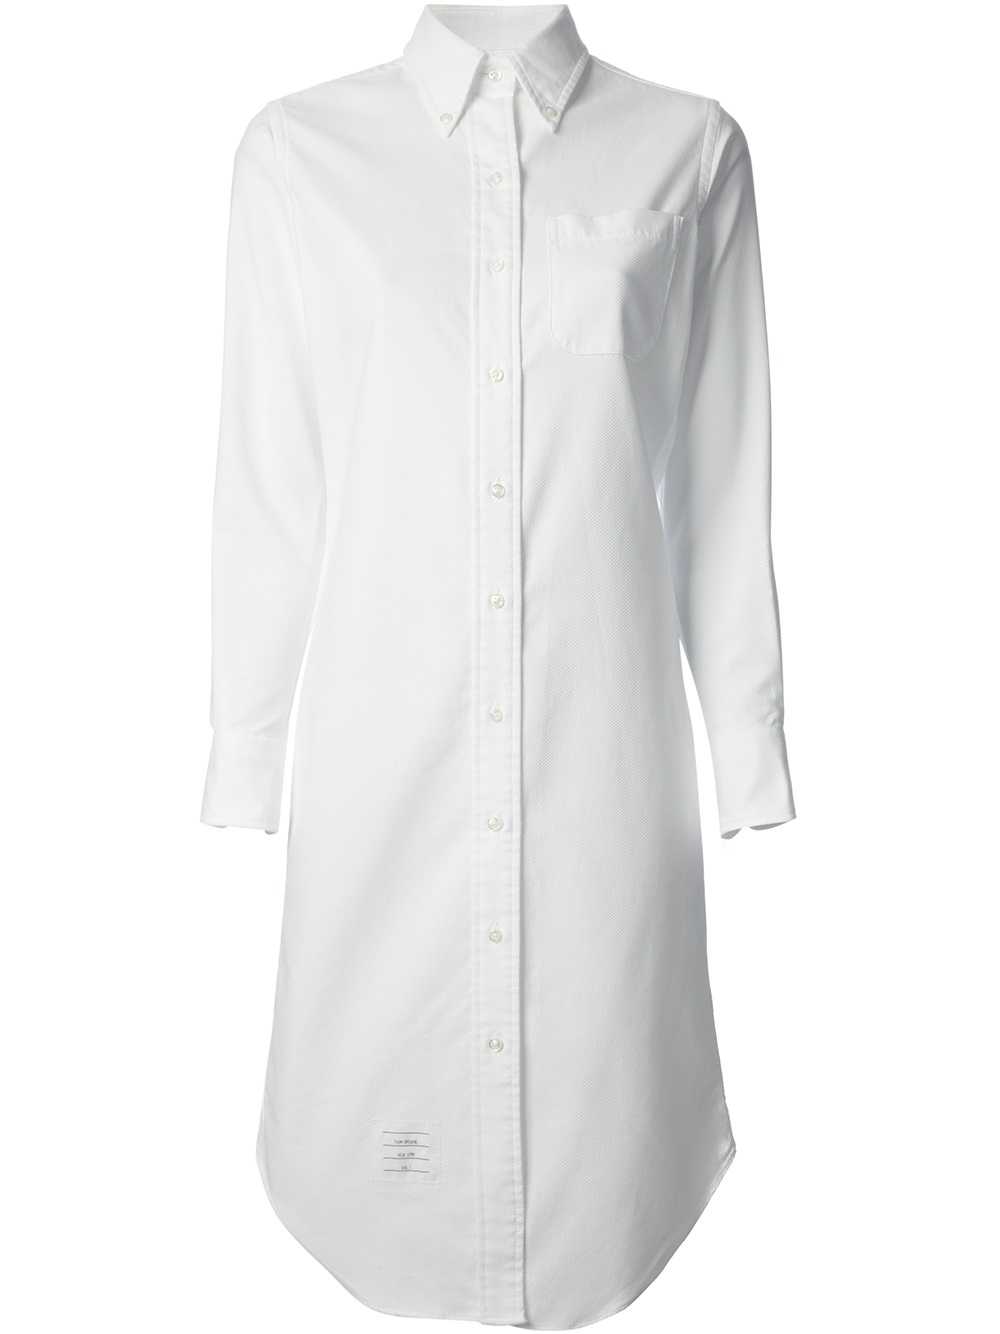 Lyst Thom Browne Knee  Length  Shirt  Dress  in White